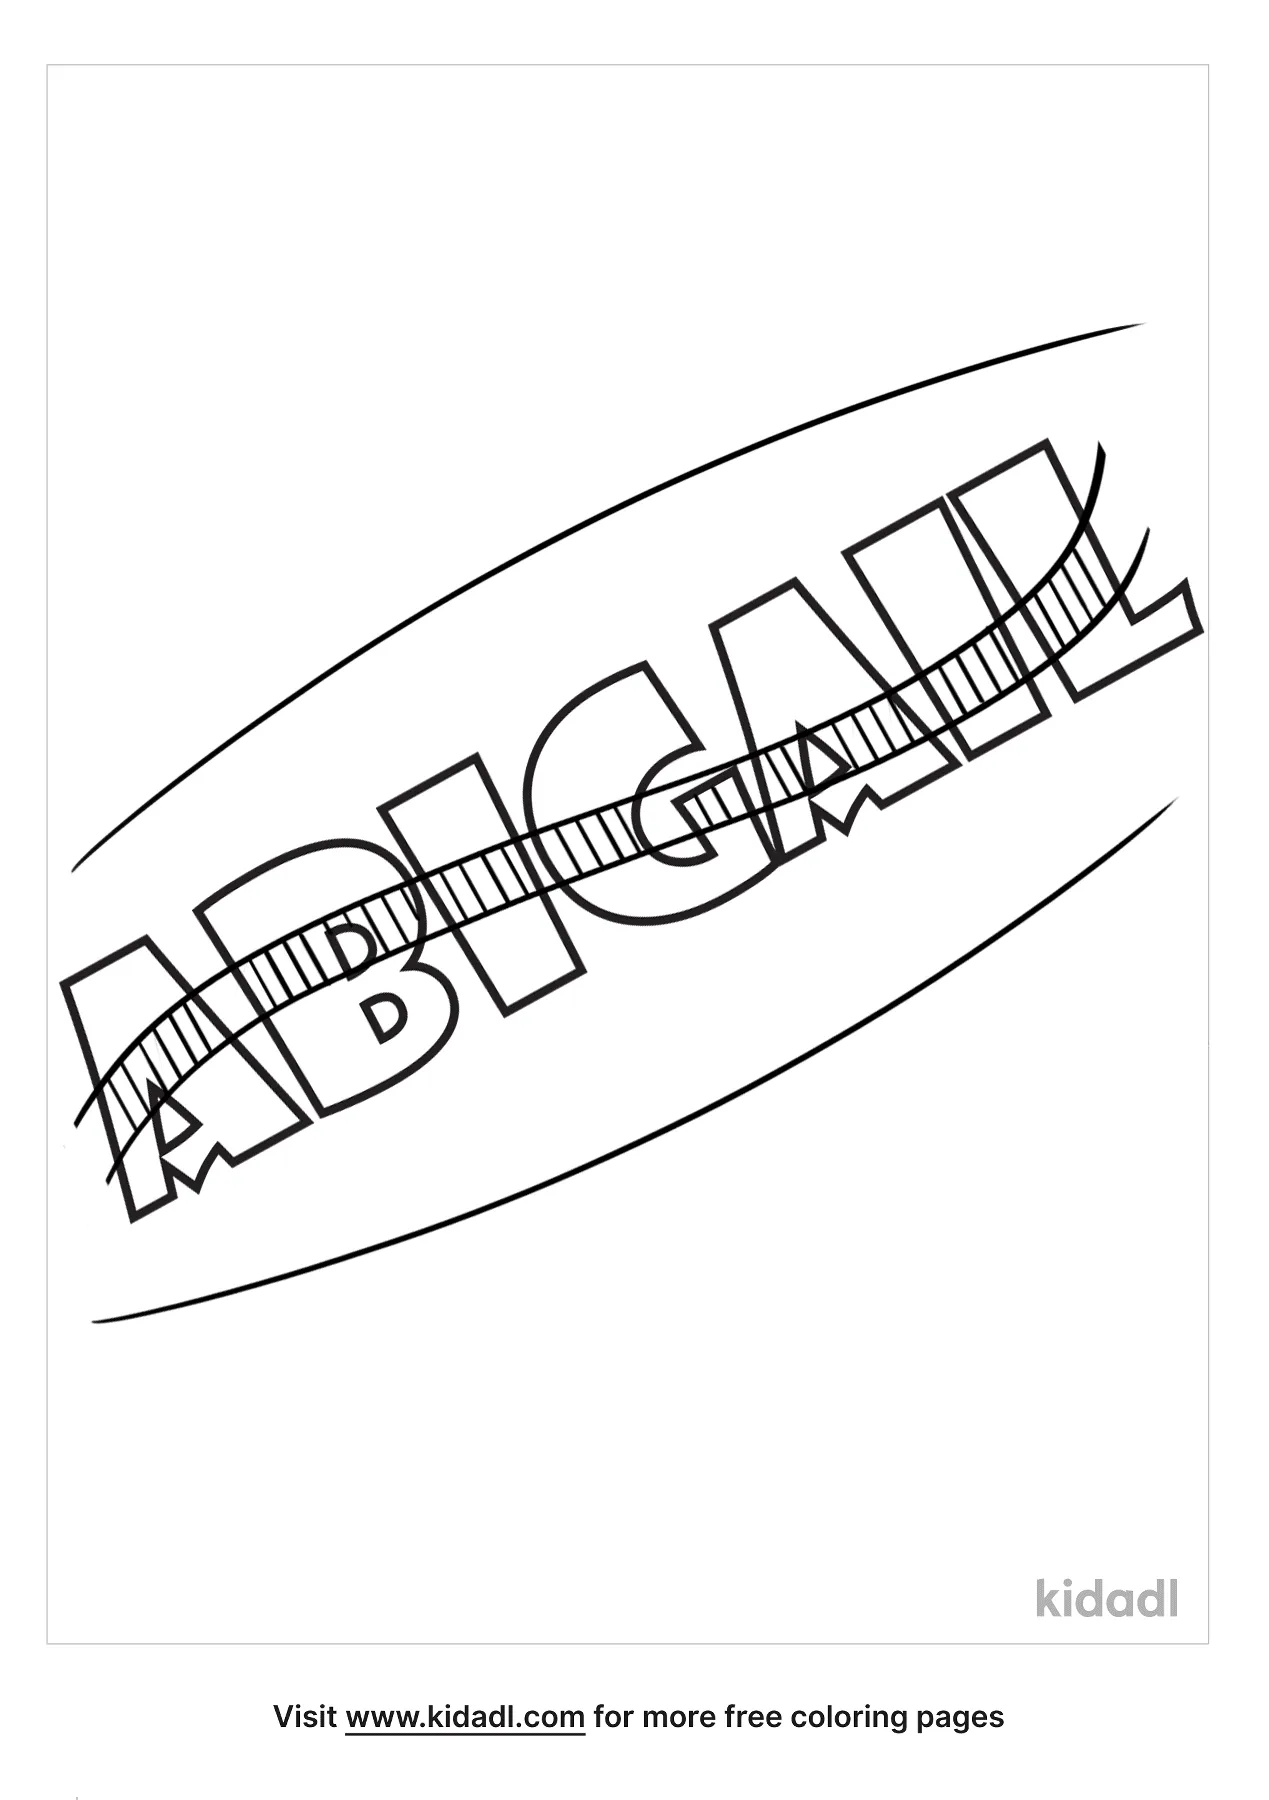 Abigail Name Coloring Page